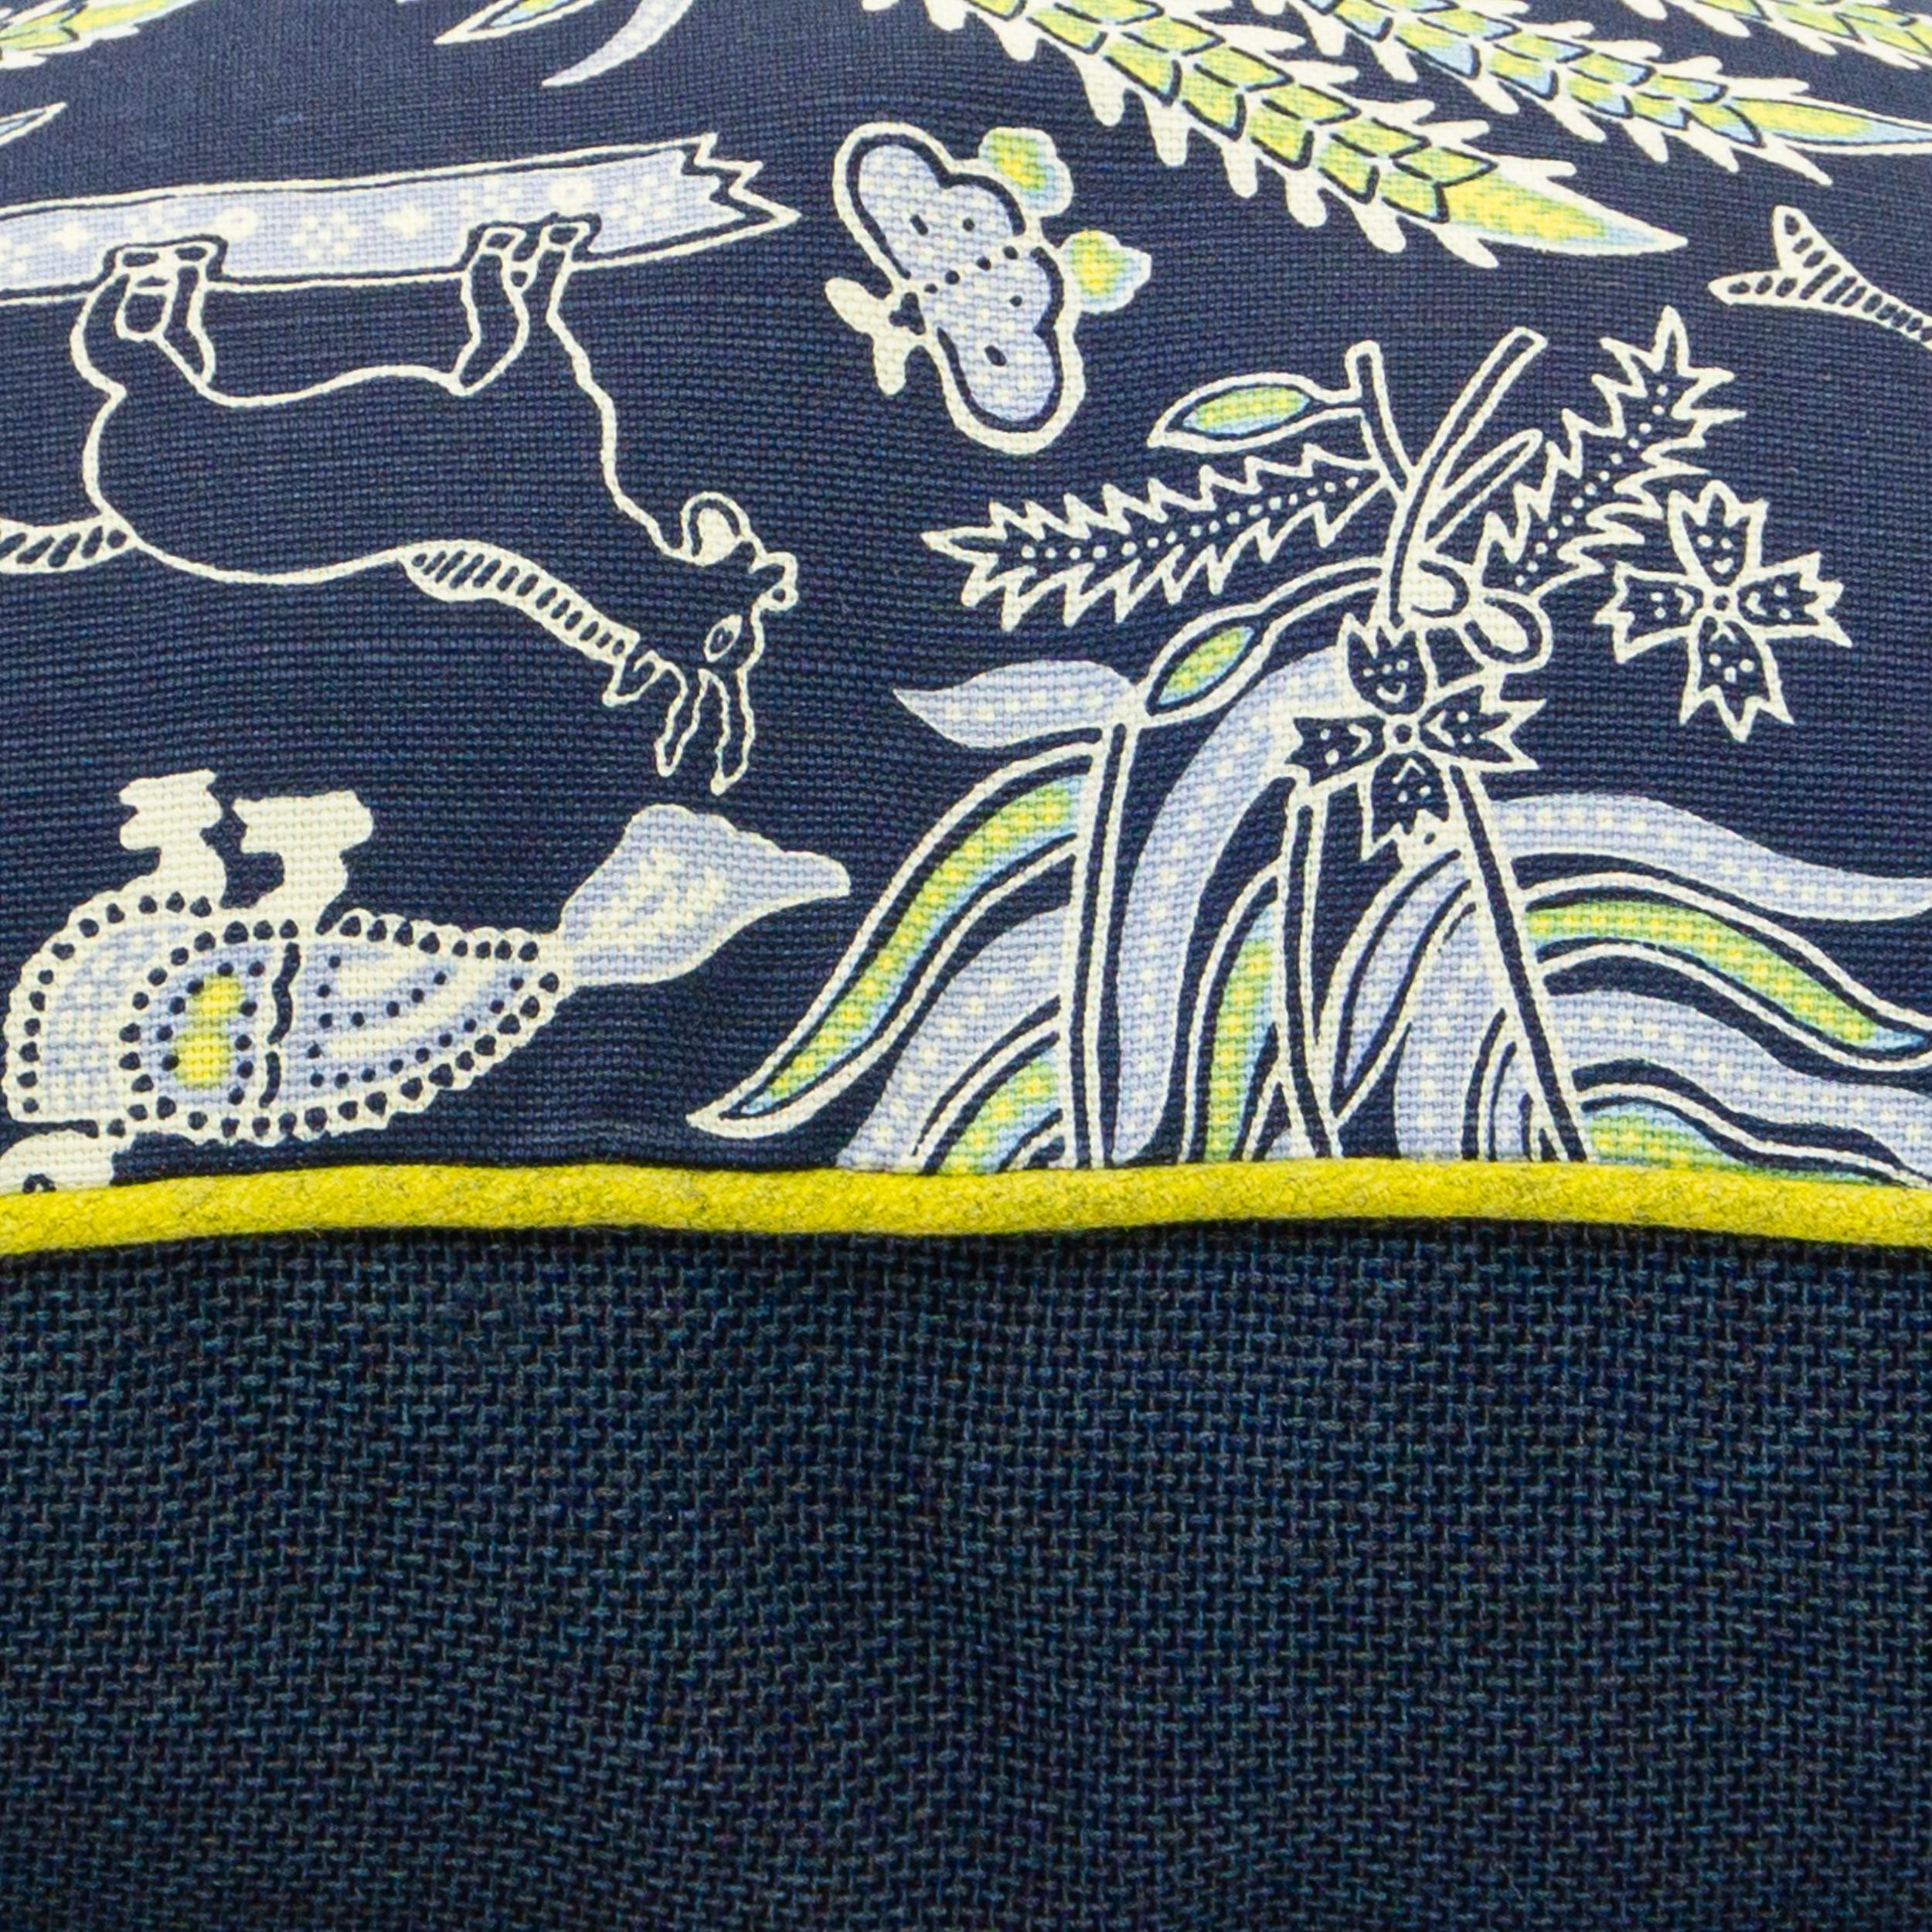 Cotton Navy Blue Printed Linen Fabric with Yellow Trim Square Pillows For Sale